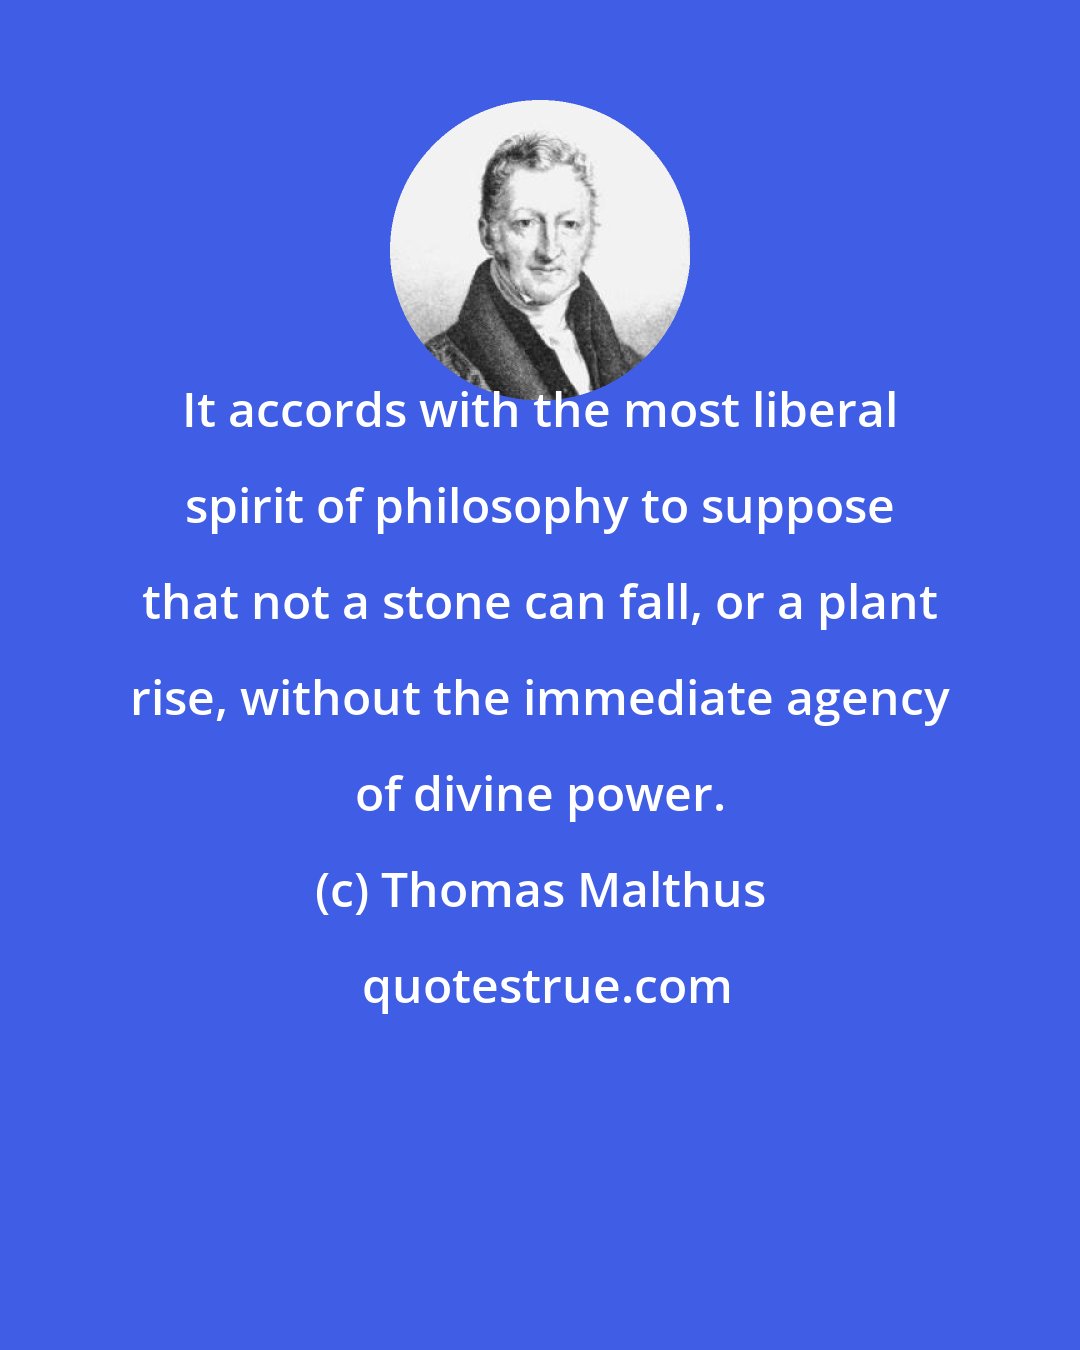 Thomas Malthus: It accords with the most liberal spirit of philosophy to suppose that not a stone can fall, or a plant rise, without the immediate agency of divine power.